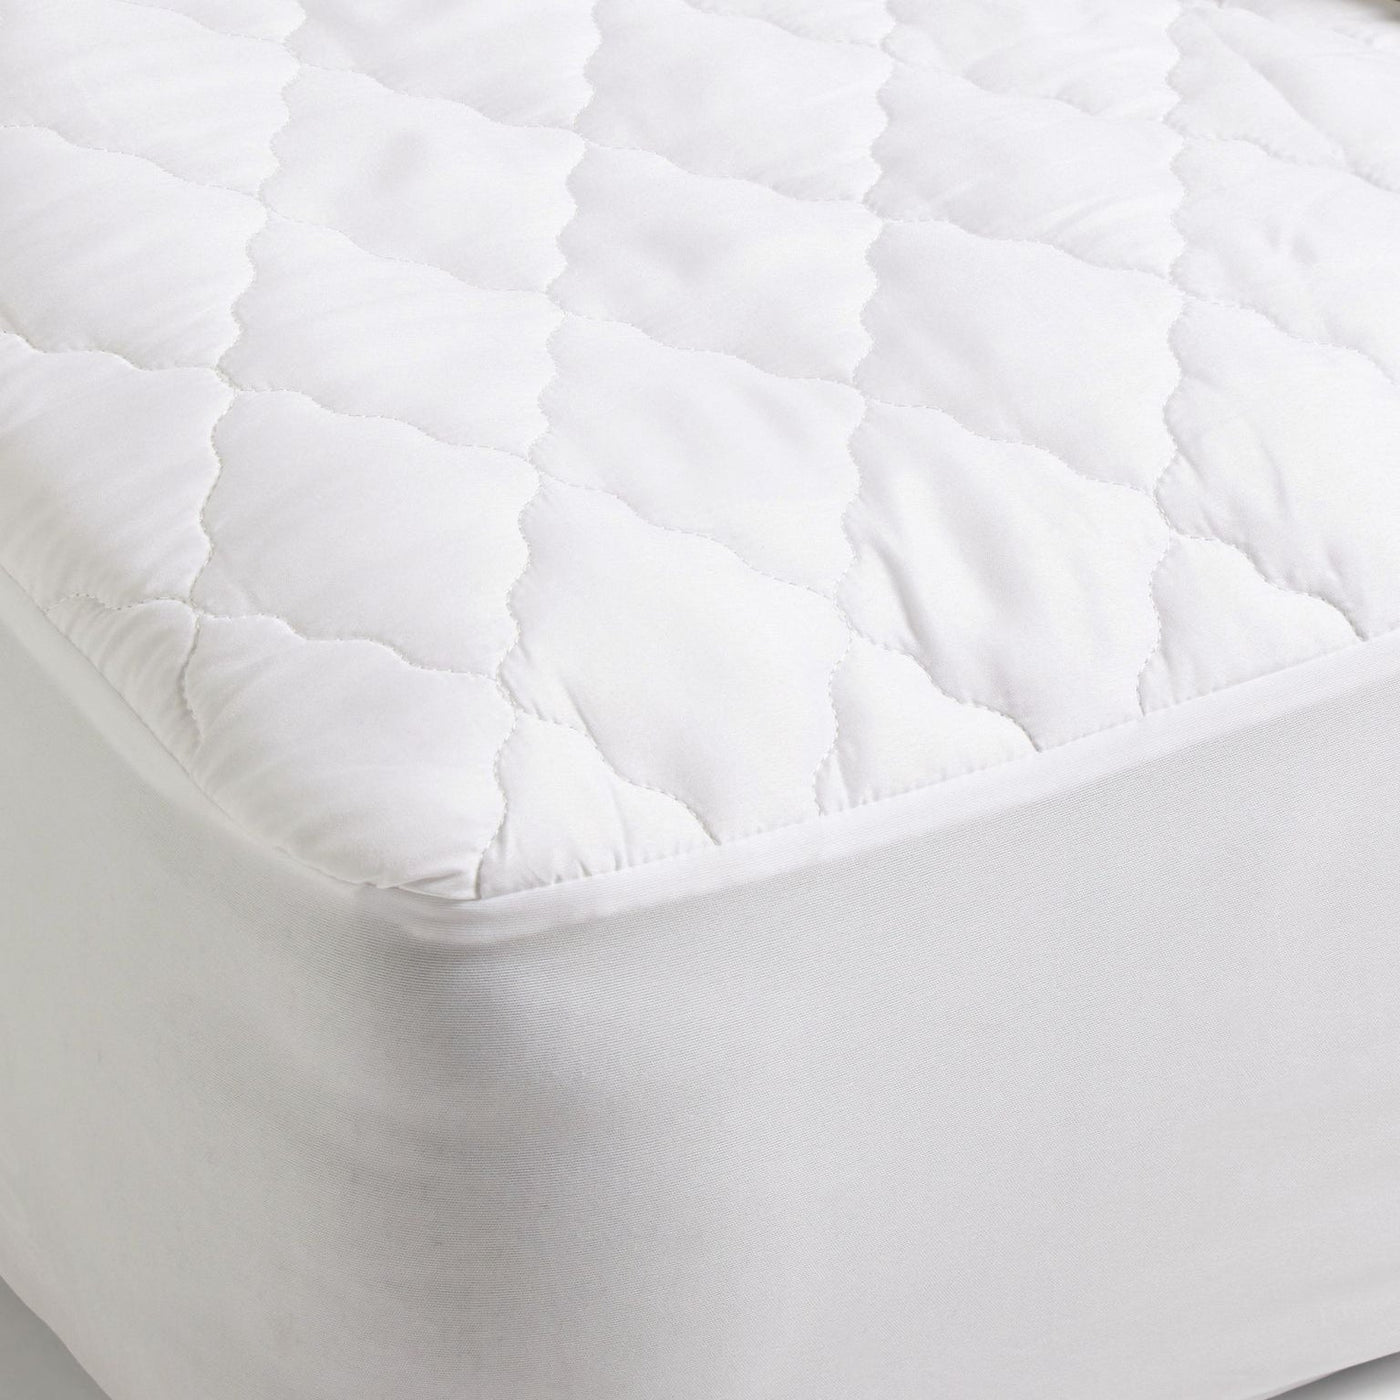 Coolmax® US Size Mattress Cover